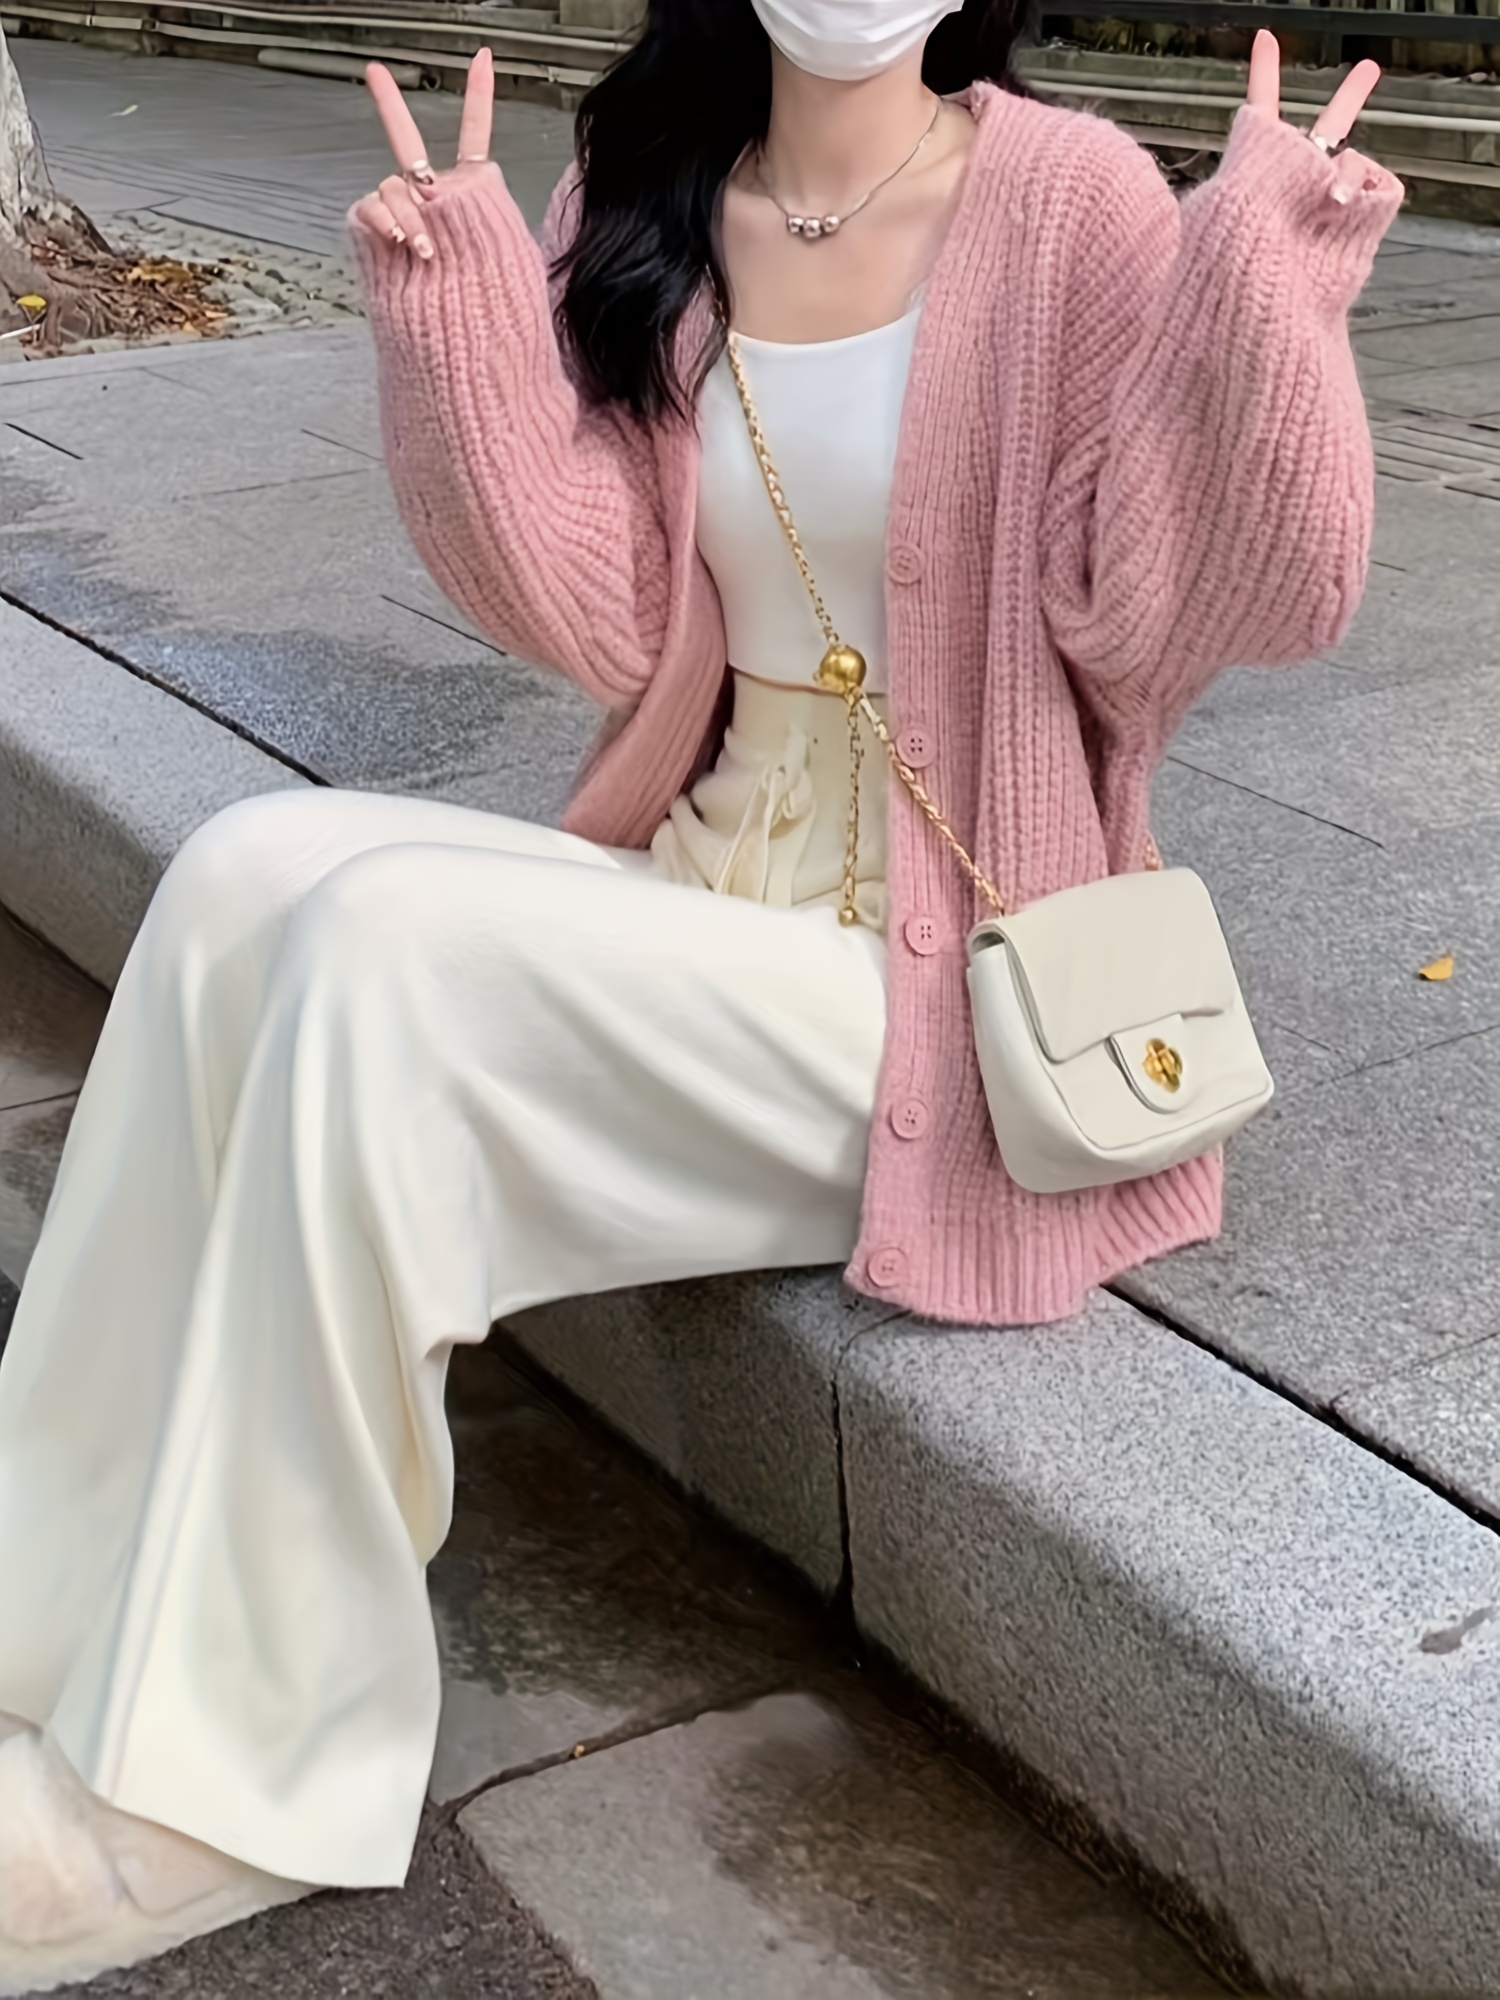 How to Wear a Cardigan Sweater - A Casual Outfit